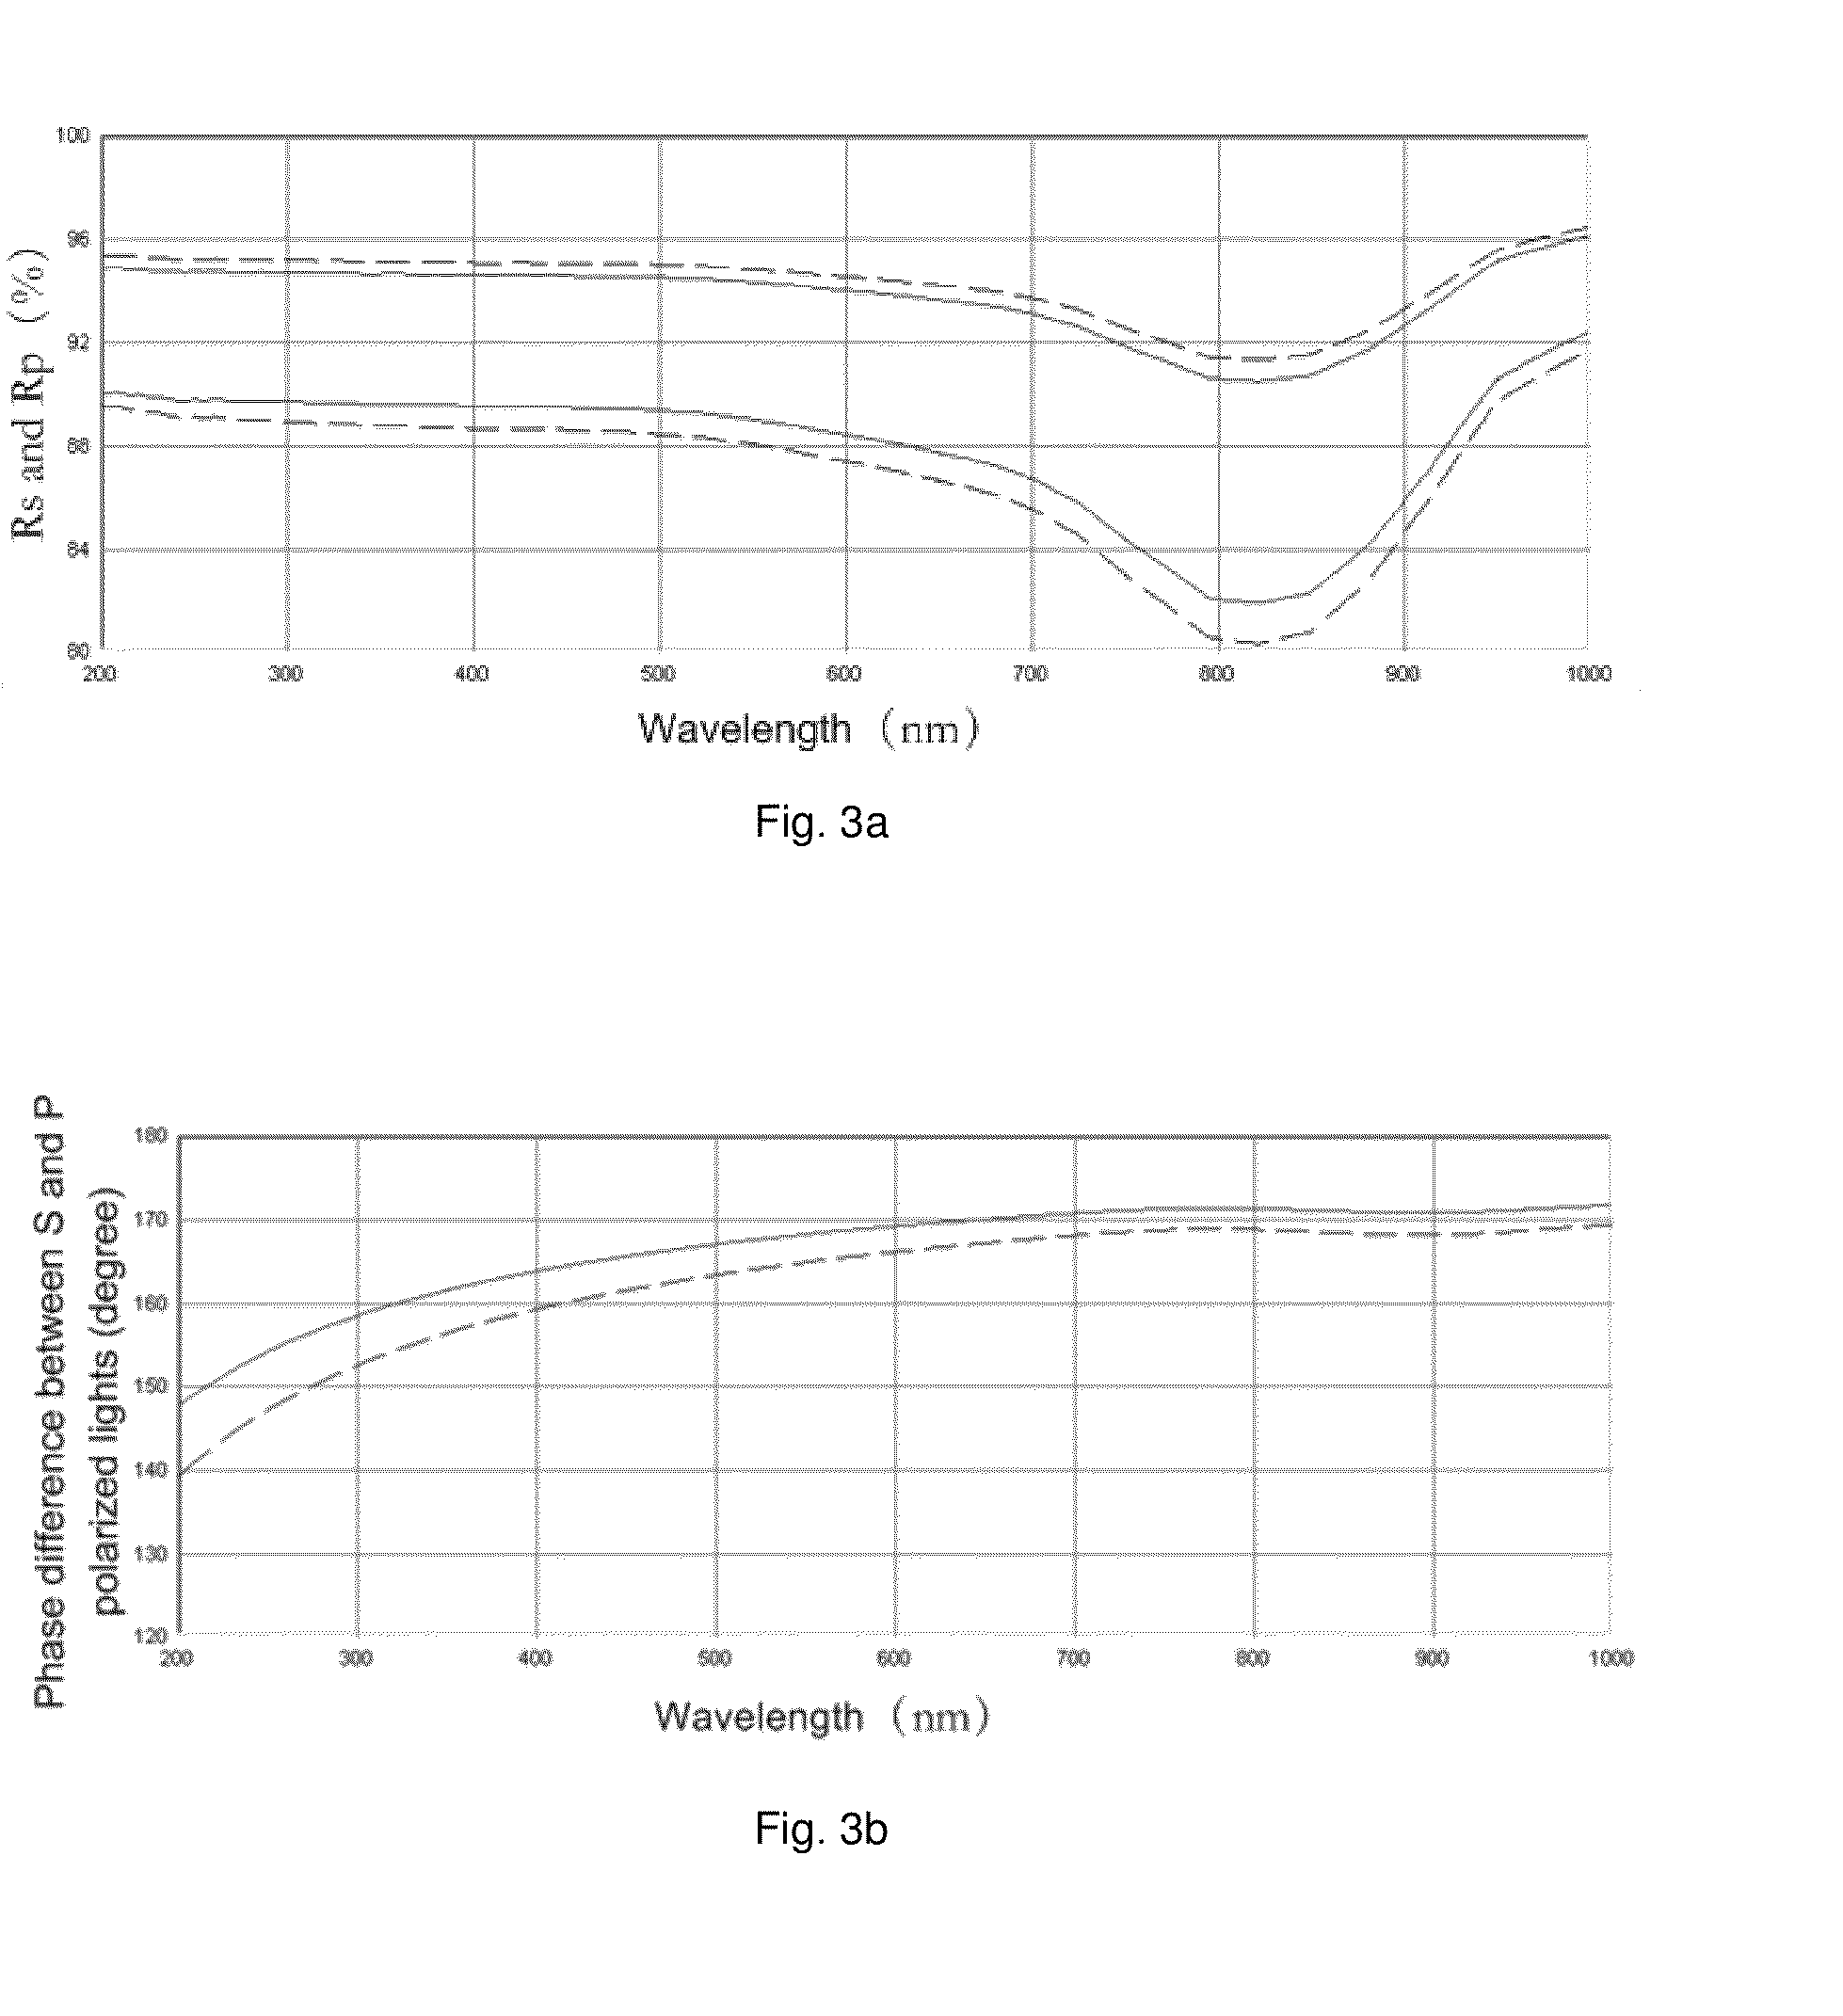 Normal-incidence broadband spectroscopic polarimeter containing reference beam and optical measurement system